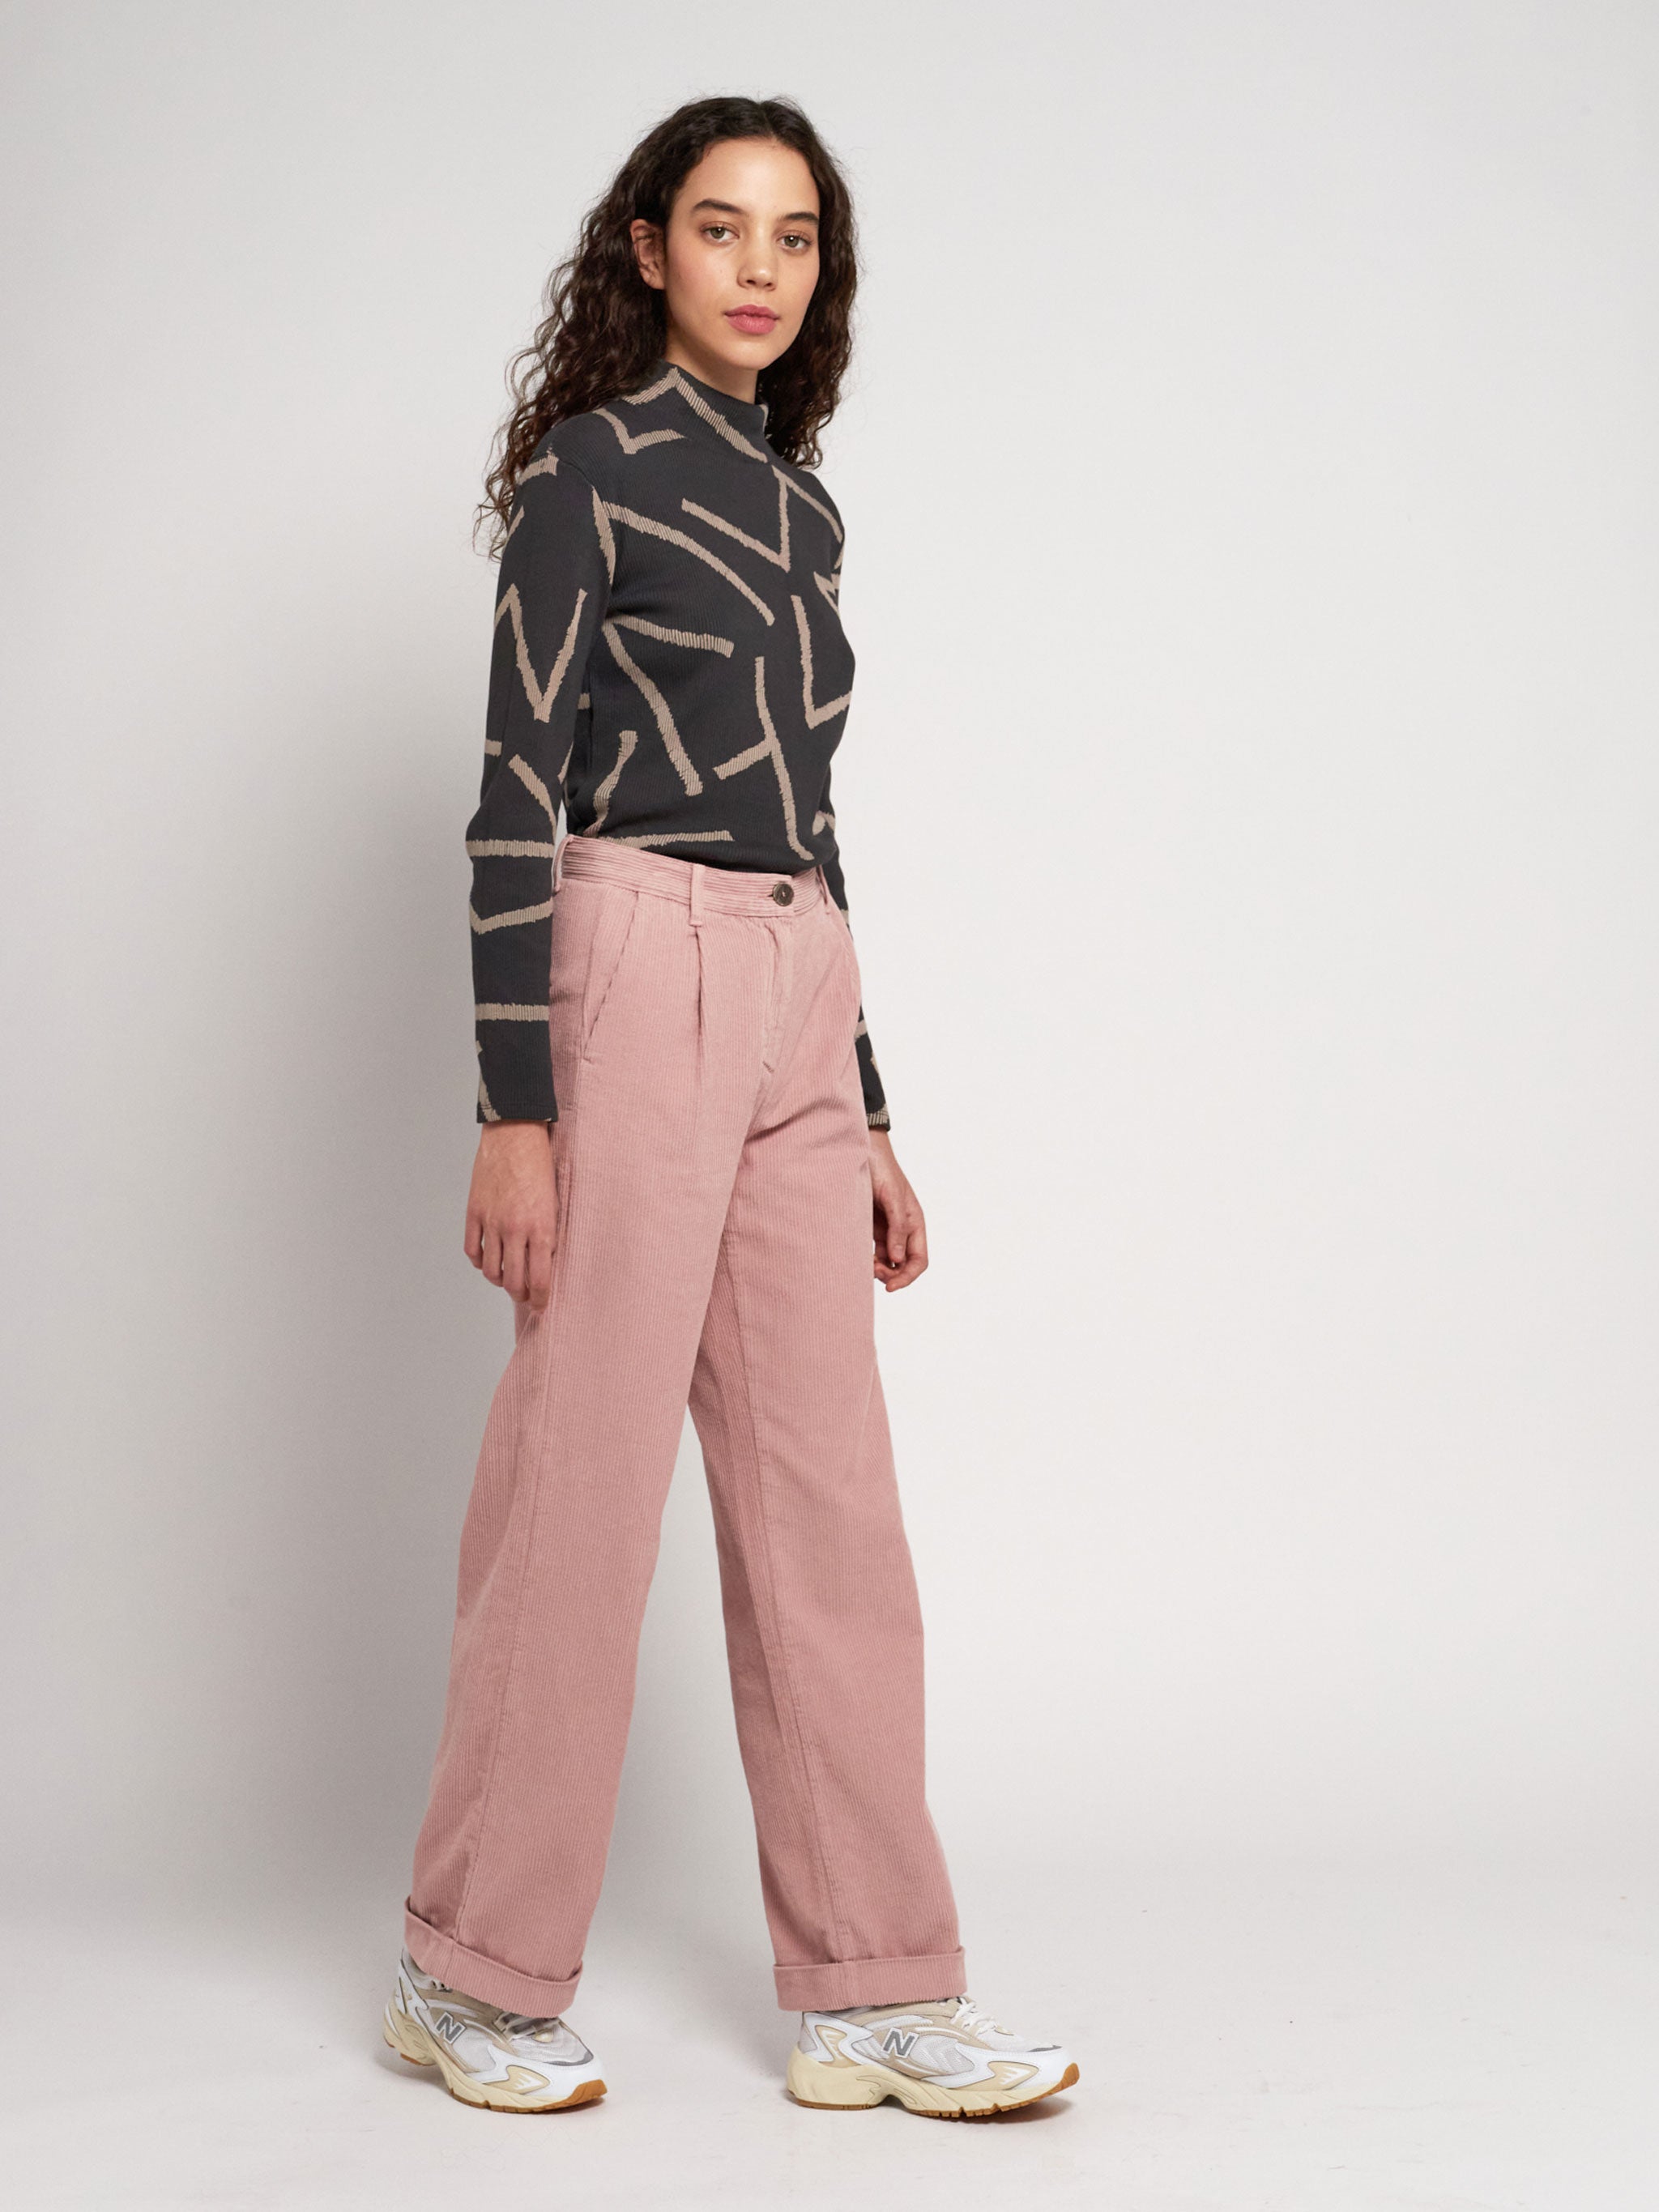 DAZY High Waist Plicated Detail Corduroy Pants | Wide leg pants outfit,  Flared pants outfit, Pleated pants outfit